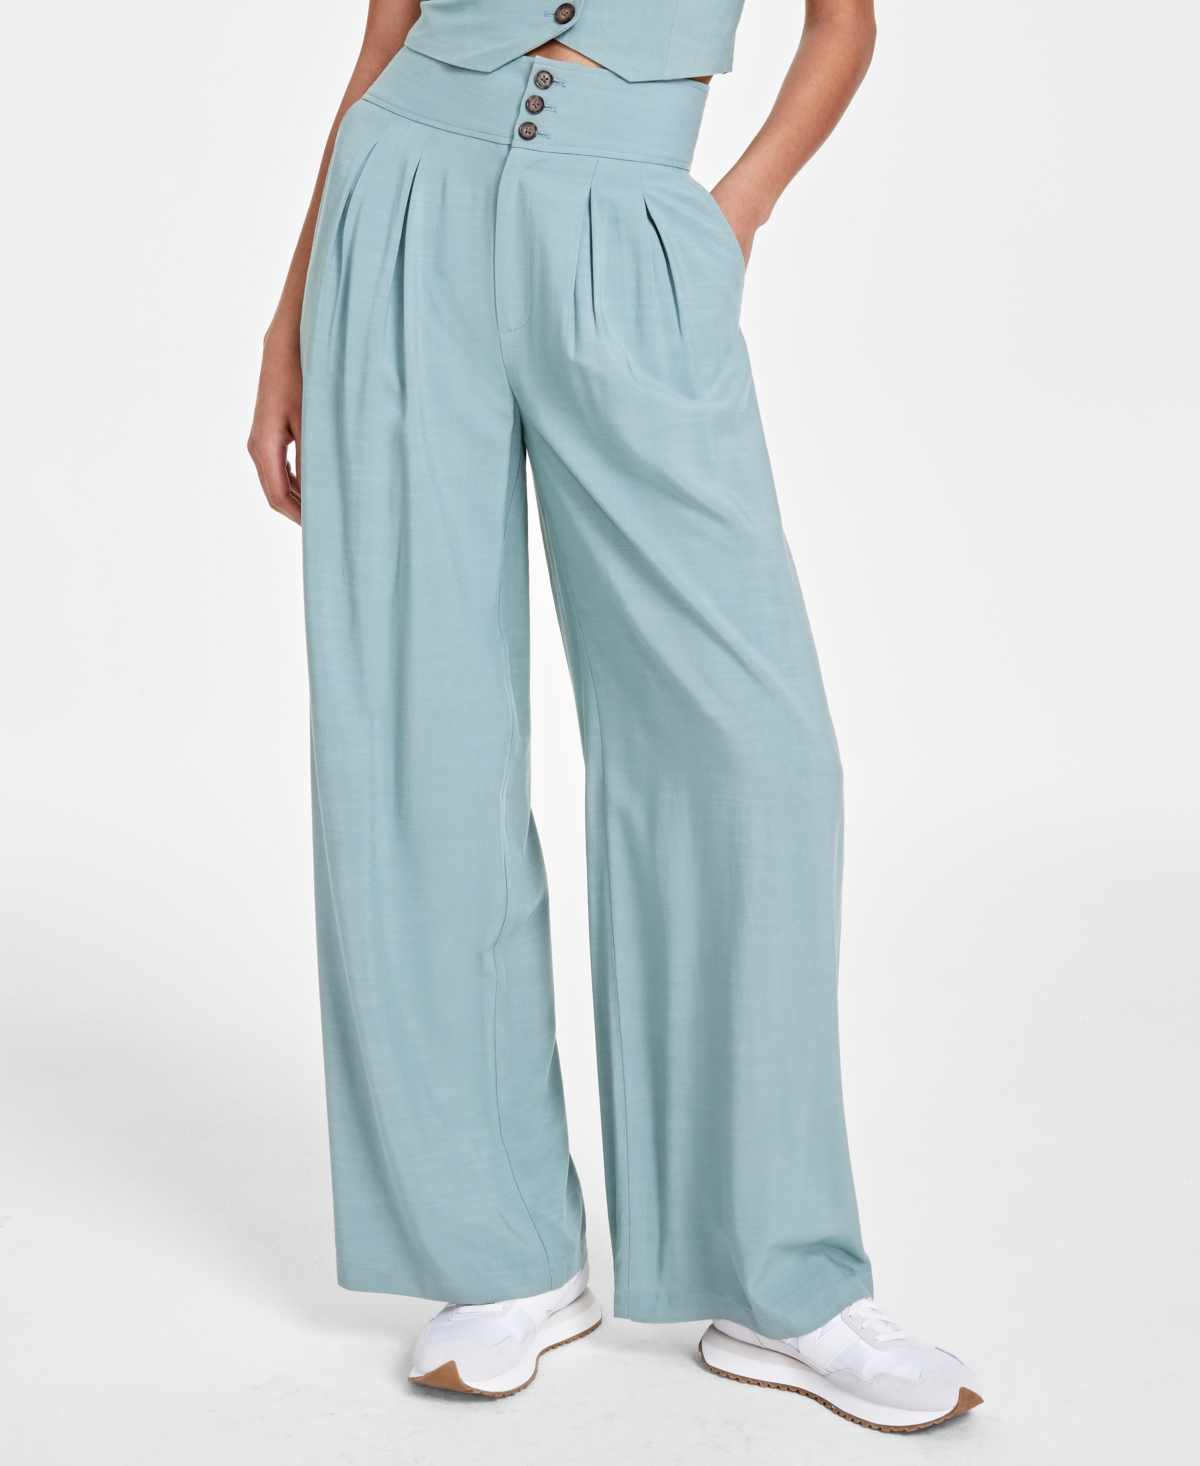 Bar Iii Petite High Rise Pleat-front Wide Leg Pants, Created For Macy's In Everglade Green